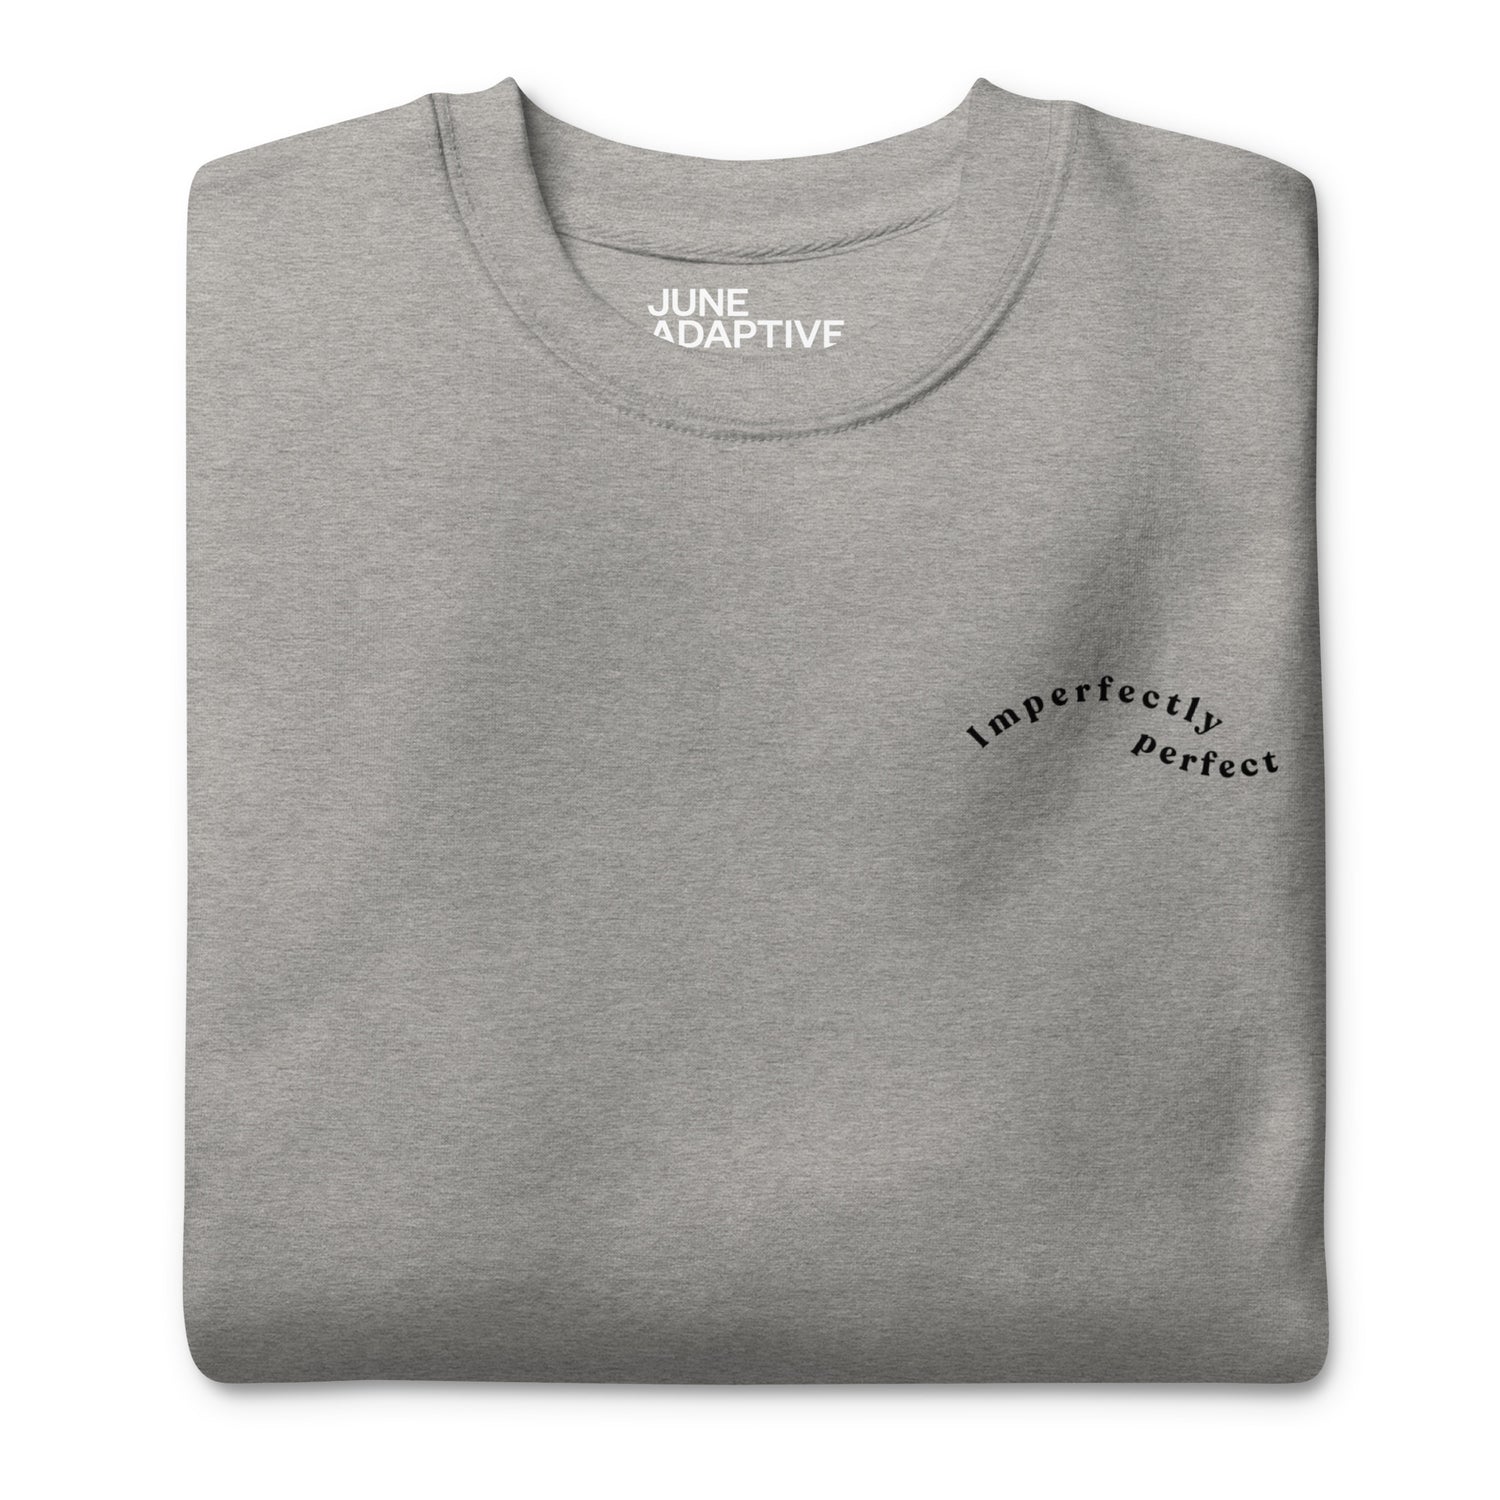 Front closeup of Grey crewneck Sweatshirt with "Imperfectly perfect" design, promoting mental health.